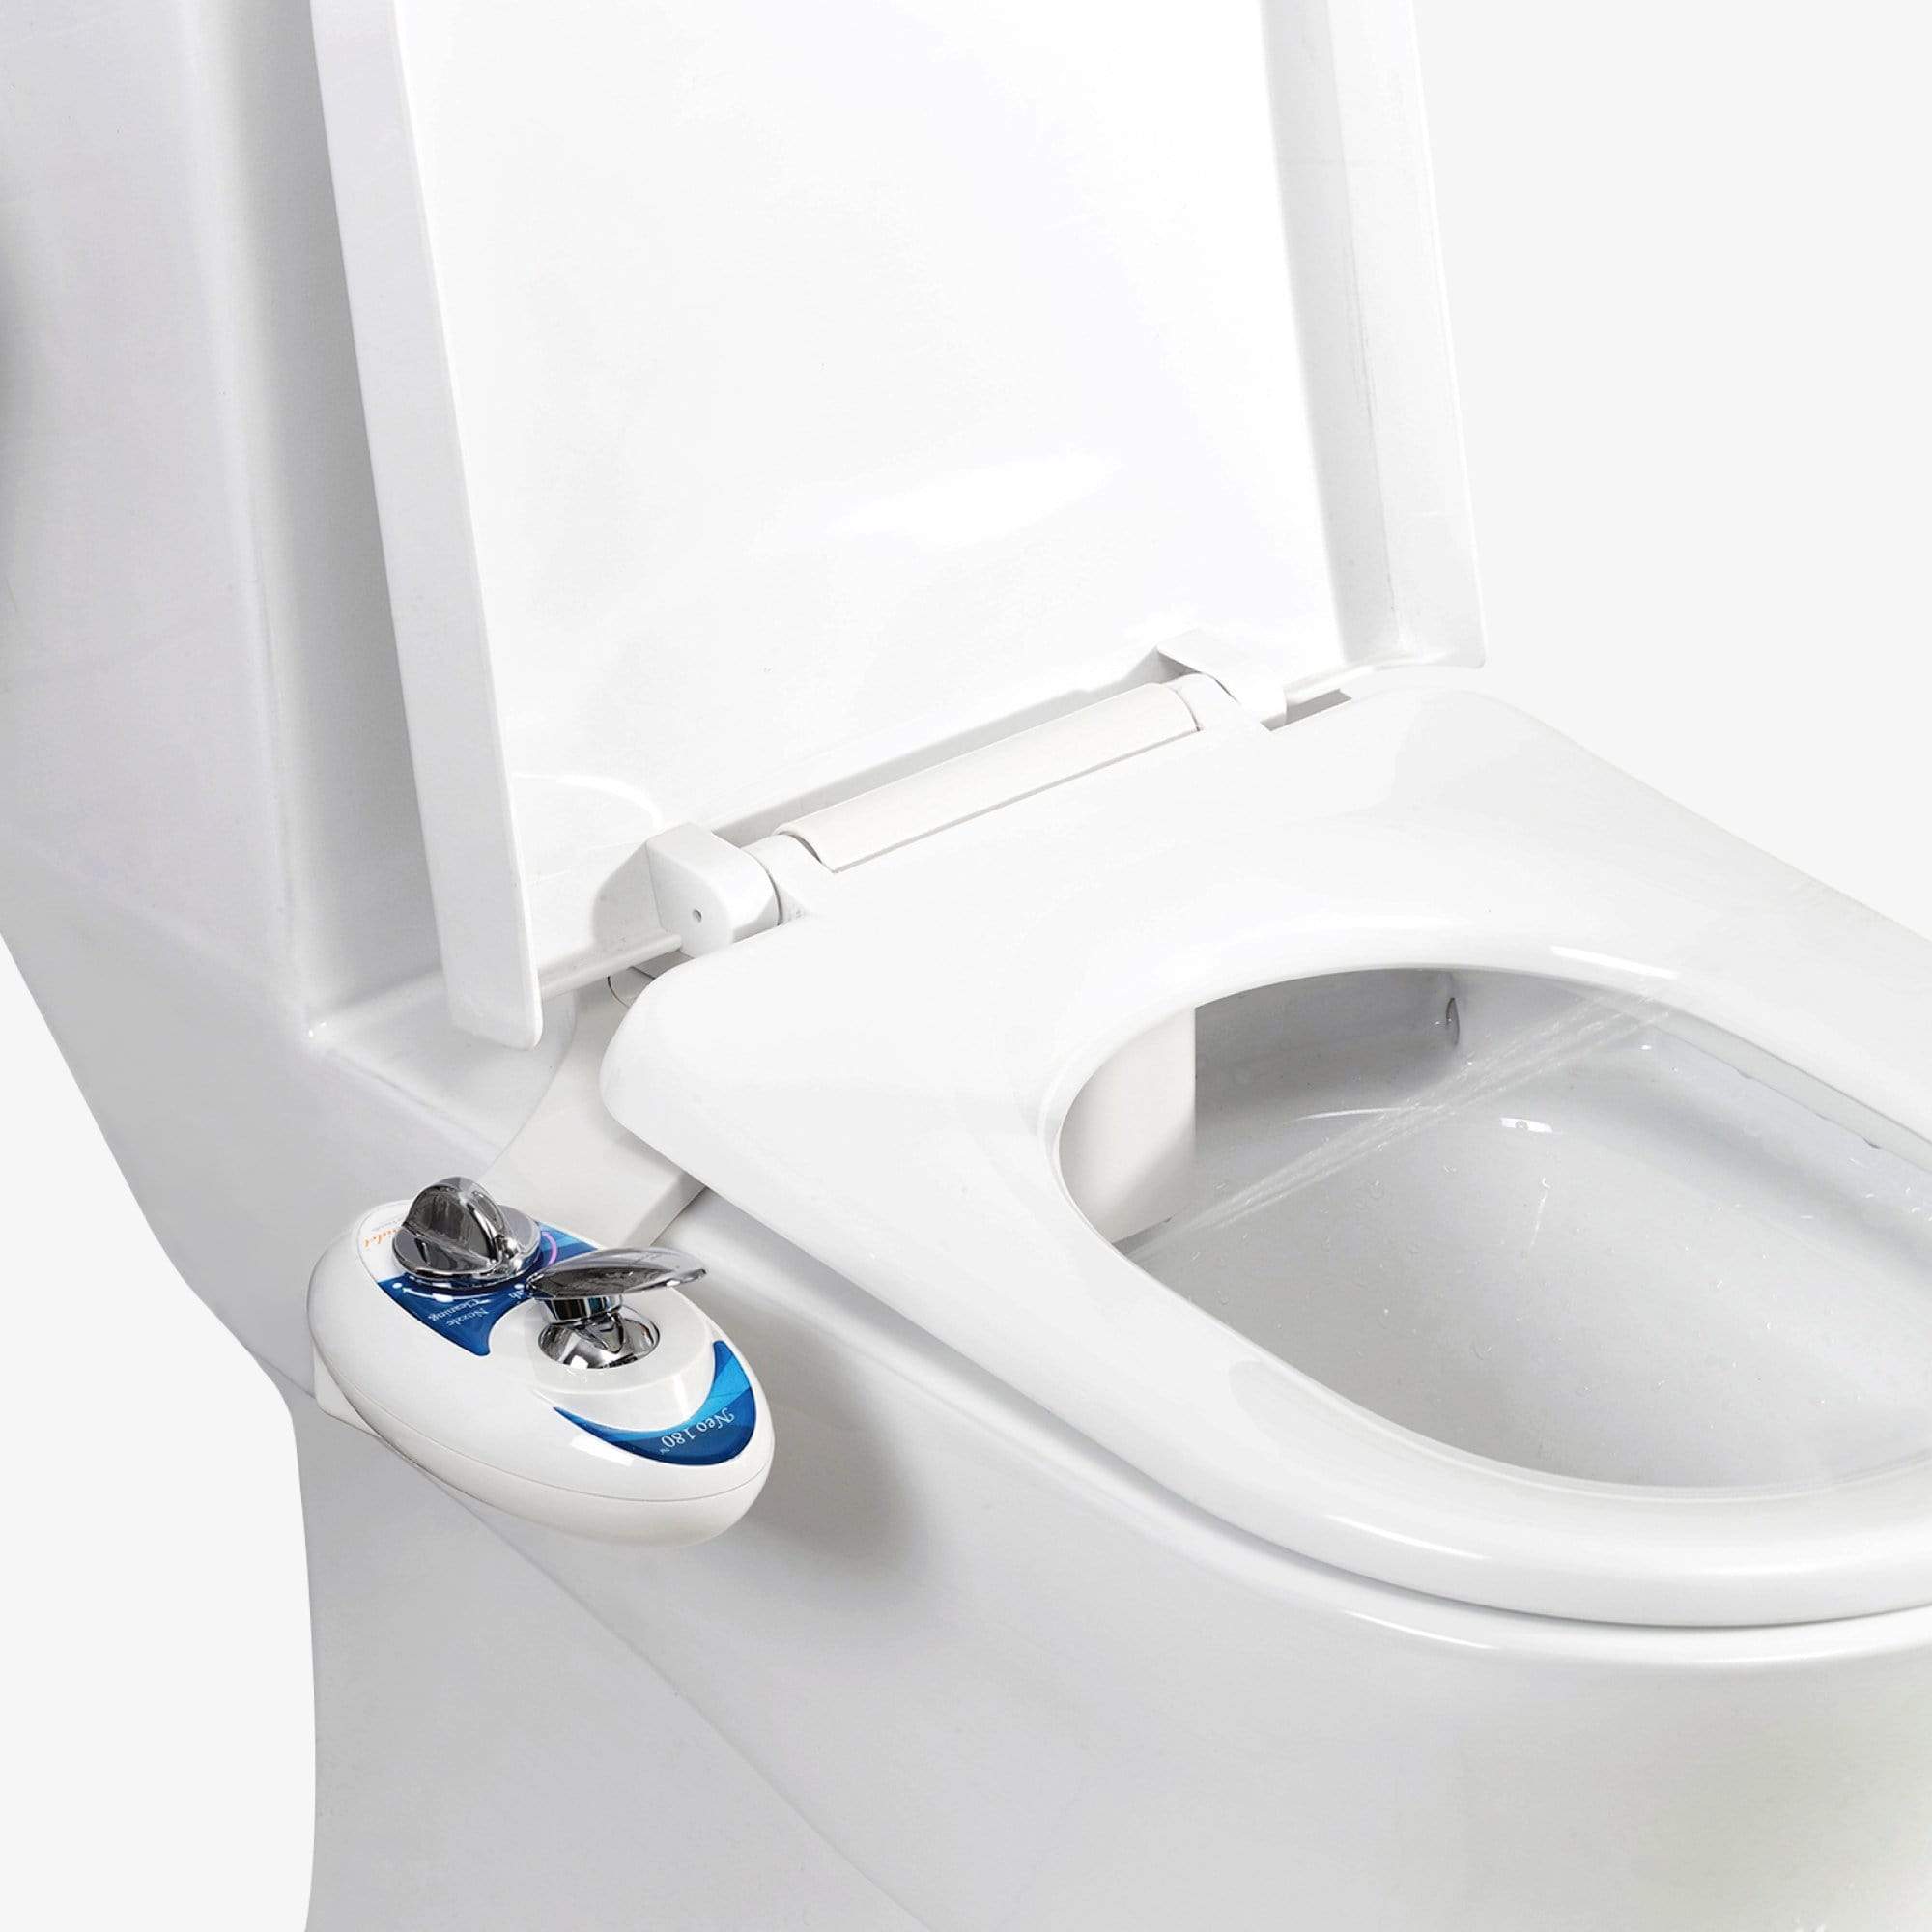 NEO 180: Imperfect Packaging - NEO 180 Blue installed on a toilet with water spraying from nozzles